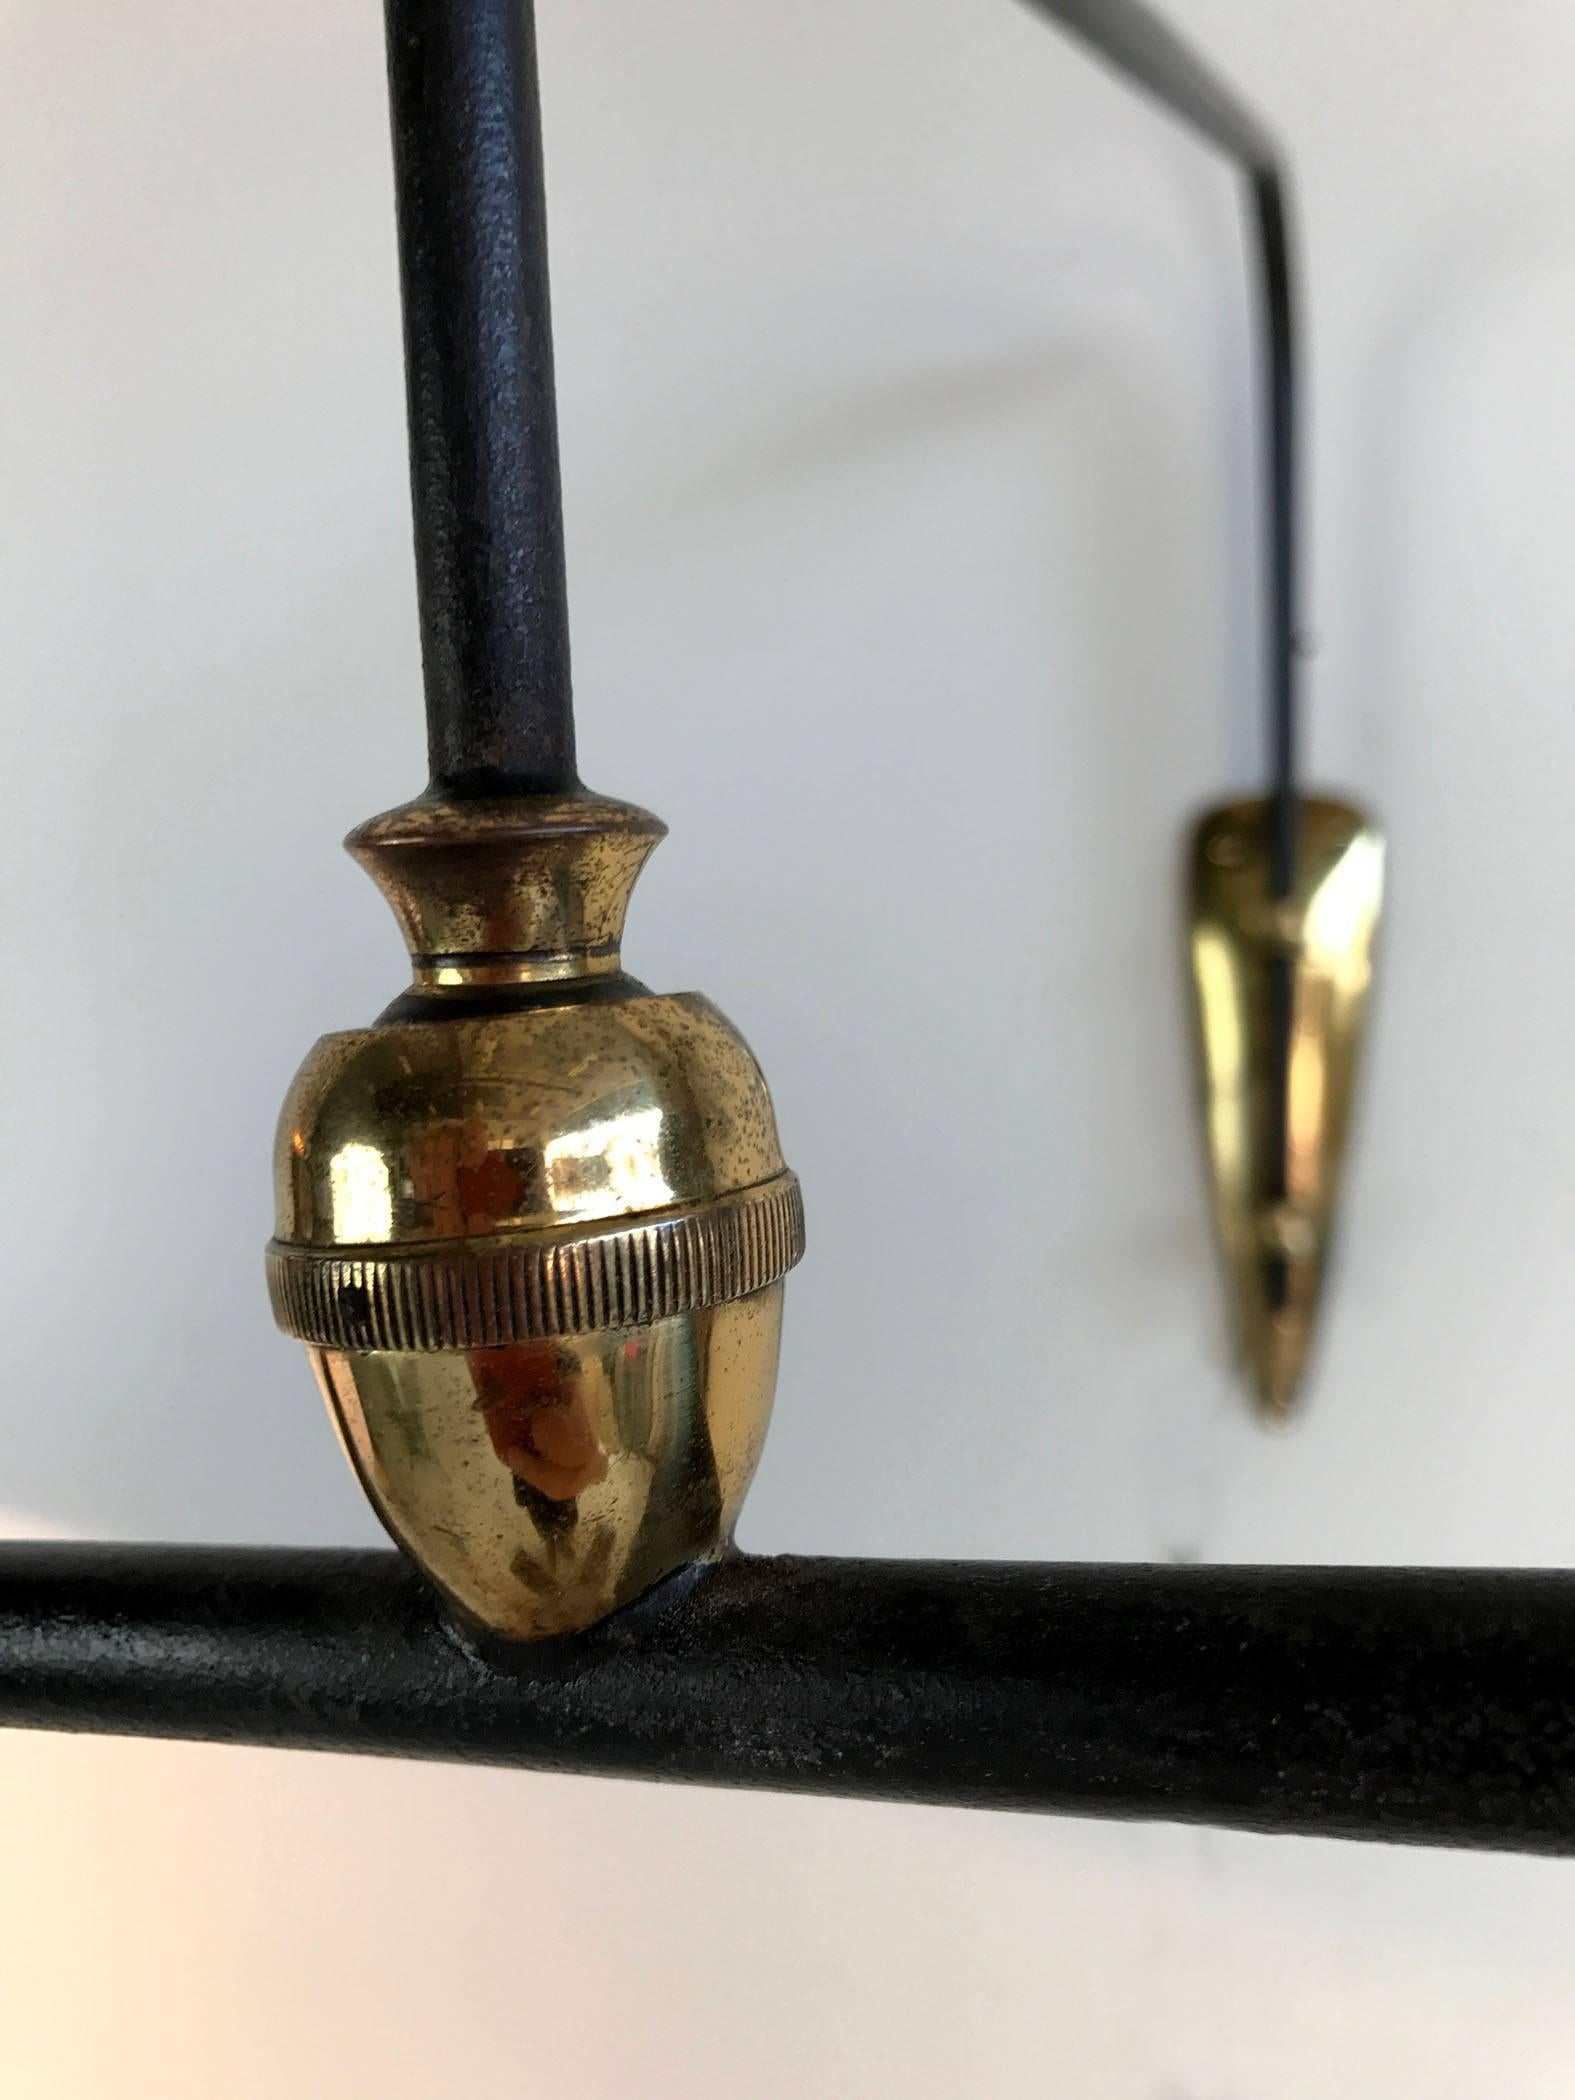 Rare counter balance wall lamp mod. 1340, black lacquered metal, bronze and gilded brass, Maison Arlus, France, 1950.
The diabolo-shaped reflector is double ignition, a counterweight and two ball joints allow to position both arms according to its